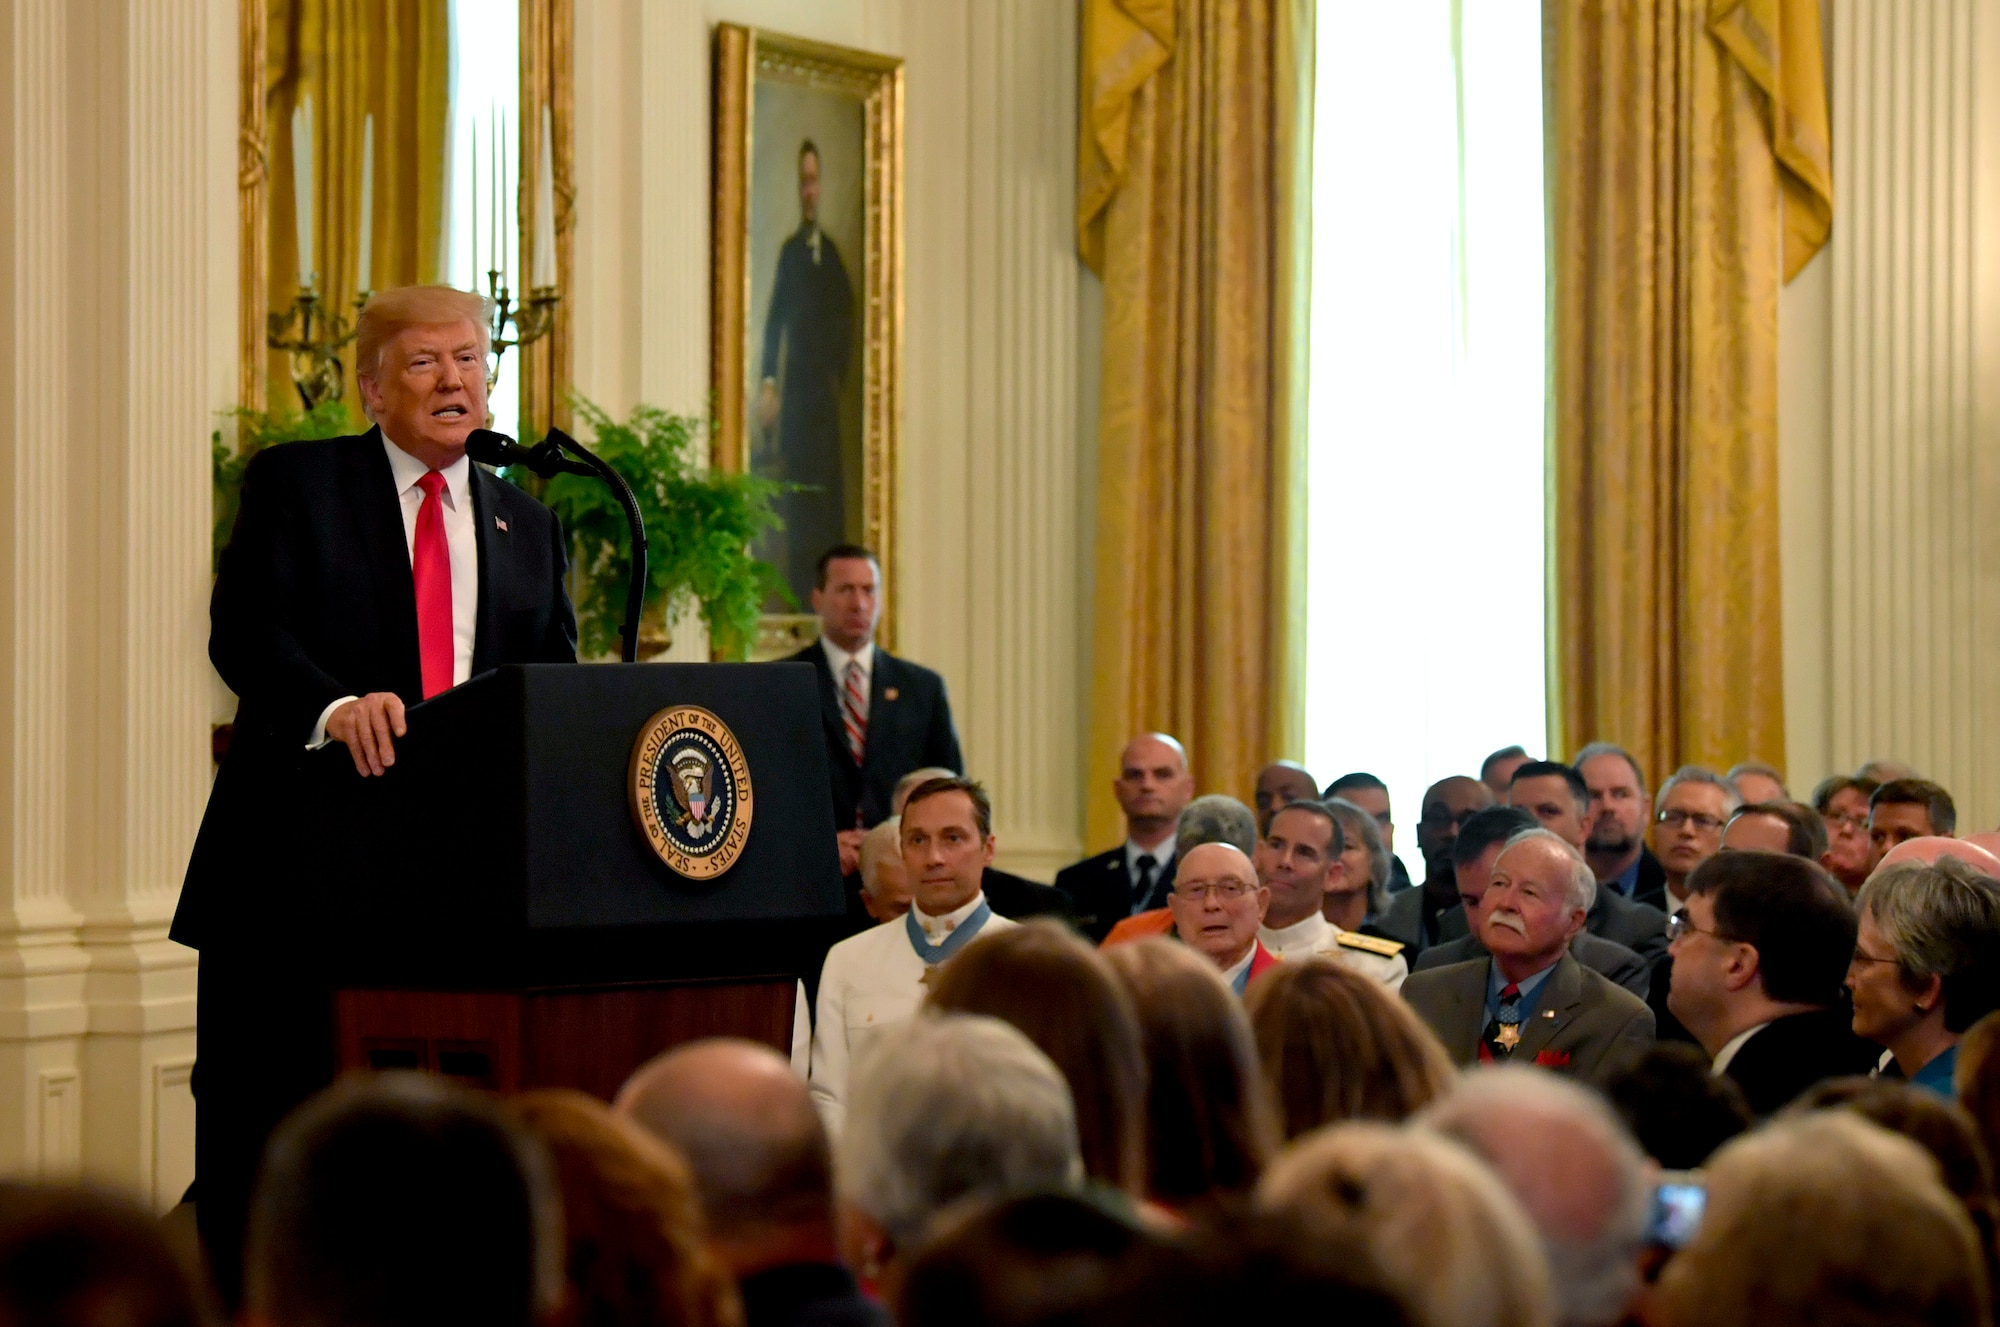 President Donald J. Trump gives his remarks during the Medal of Honor ceremony for Tech. Sgt. John Chapman at the White House in Washington, D.C., Aug. 22, 2018. Chapman was posthumously awarded the Medal of Honor for actions on Takur Ghar mountain in Afghanistan on March 4, 2002, when his elite special operations team was ambushed by the enemy and came under heavy fire from multiple directions. Chapman immediately charged an enemy bunker through thigh-deep snow and killed all enemy occupants. Courageously moving from cover to assault a second machine gun bunker, he was injured by enemy fire. Despite severe wounds, he fought relentlessly, sustaining a violent engagement with multiple enemy personnel before making the ultimate sacrifice. With his last actions, he saved the lives of his teammates. (U.S. Air Force photo by Wayne A. Clark)